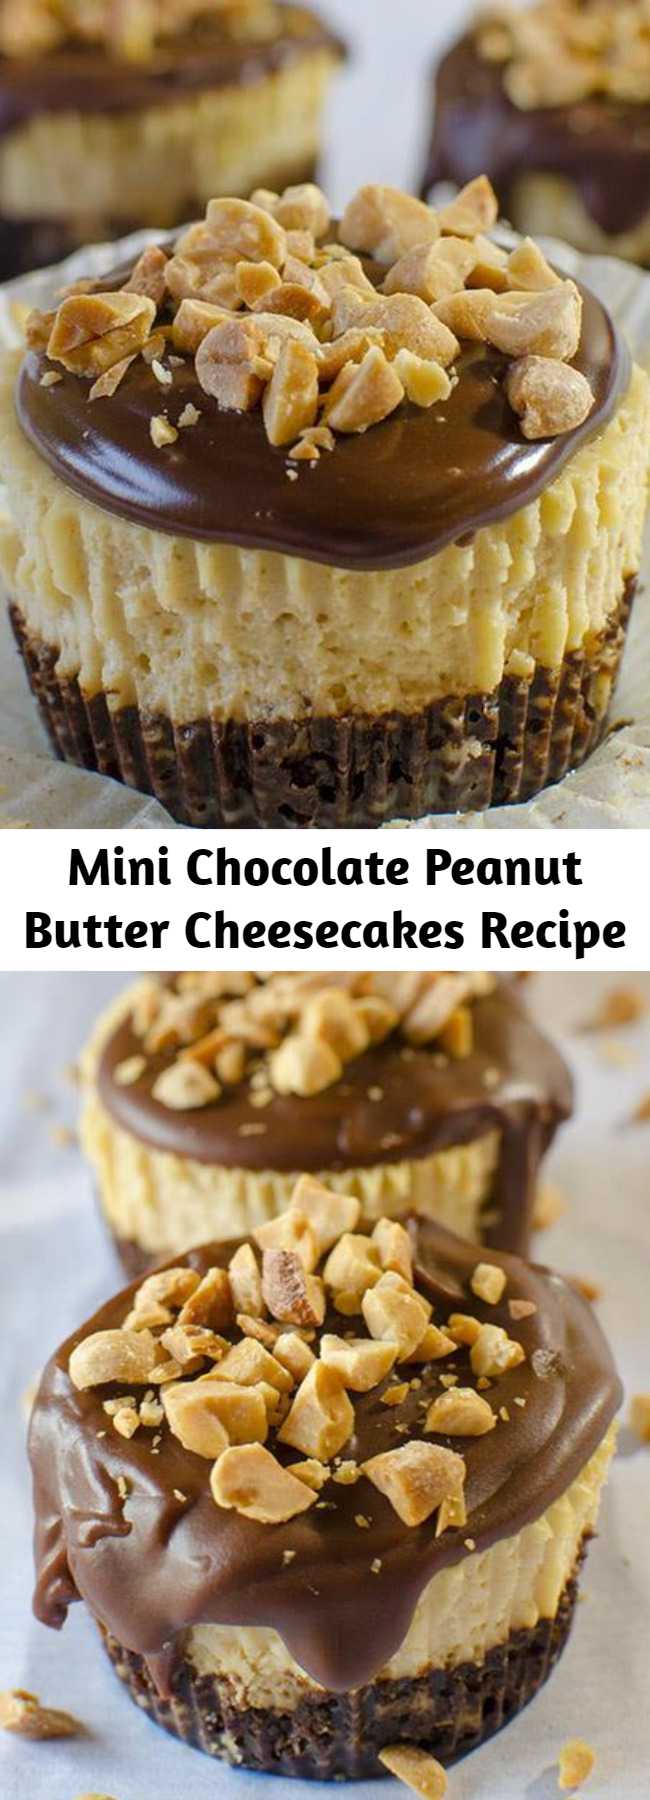 Mini Chocolate Peanut Butter Cheesecakes Recipe - Mini Chocolate Peanut Butter Cheesecakes are delicious individual portions of peanut butter cheesecakes with chocolate graham cracker crust and chocolate ganache topping. This cute homemade cheesecake recipe is a great dessert for your child’s school bake sale, or your next party!